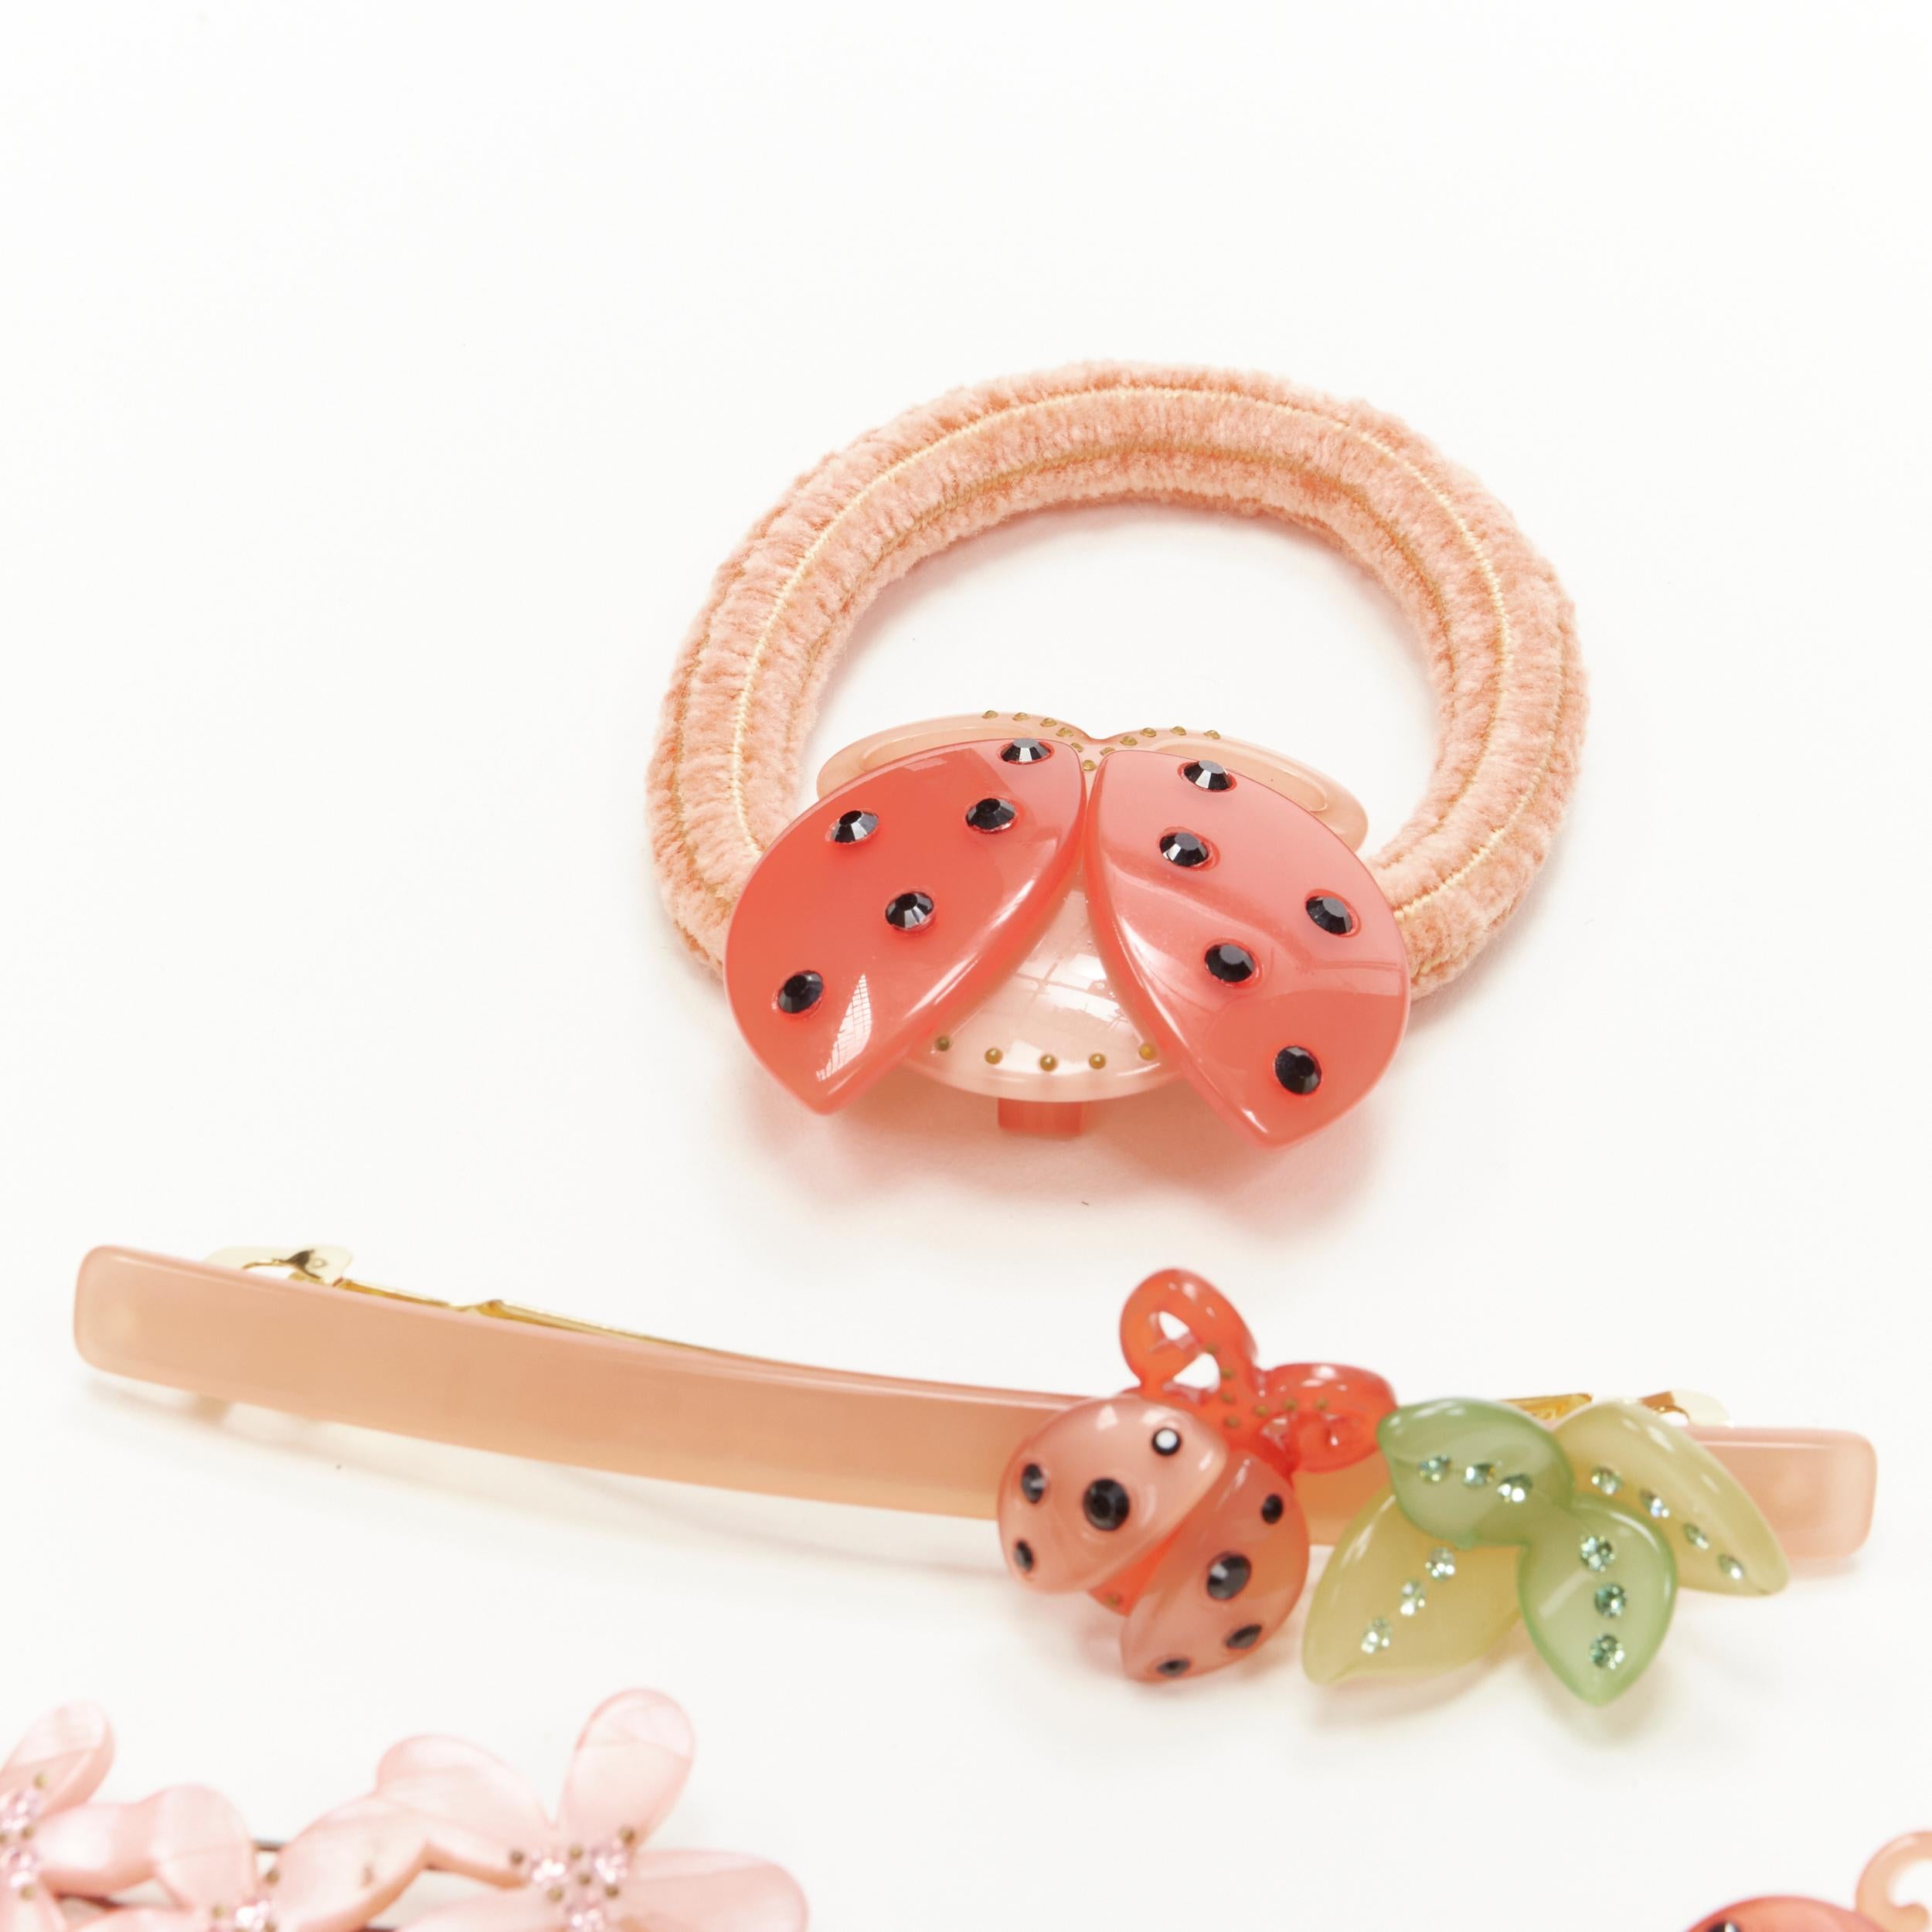 CHIC & MODE Alexandre Zouari orange butterfly beetles flower hair clip tie X6
Reference: ANWU/A00254
Brand: Chic and Mode
Designer: Alexandre Zouari
Material: Plastic, Metal
Color: Pink, Yellow
Pattern: Animal Print
Closure: Clip On
Extra Details: